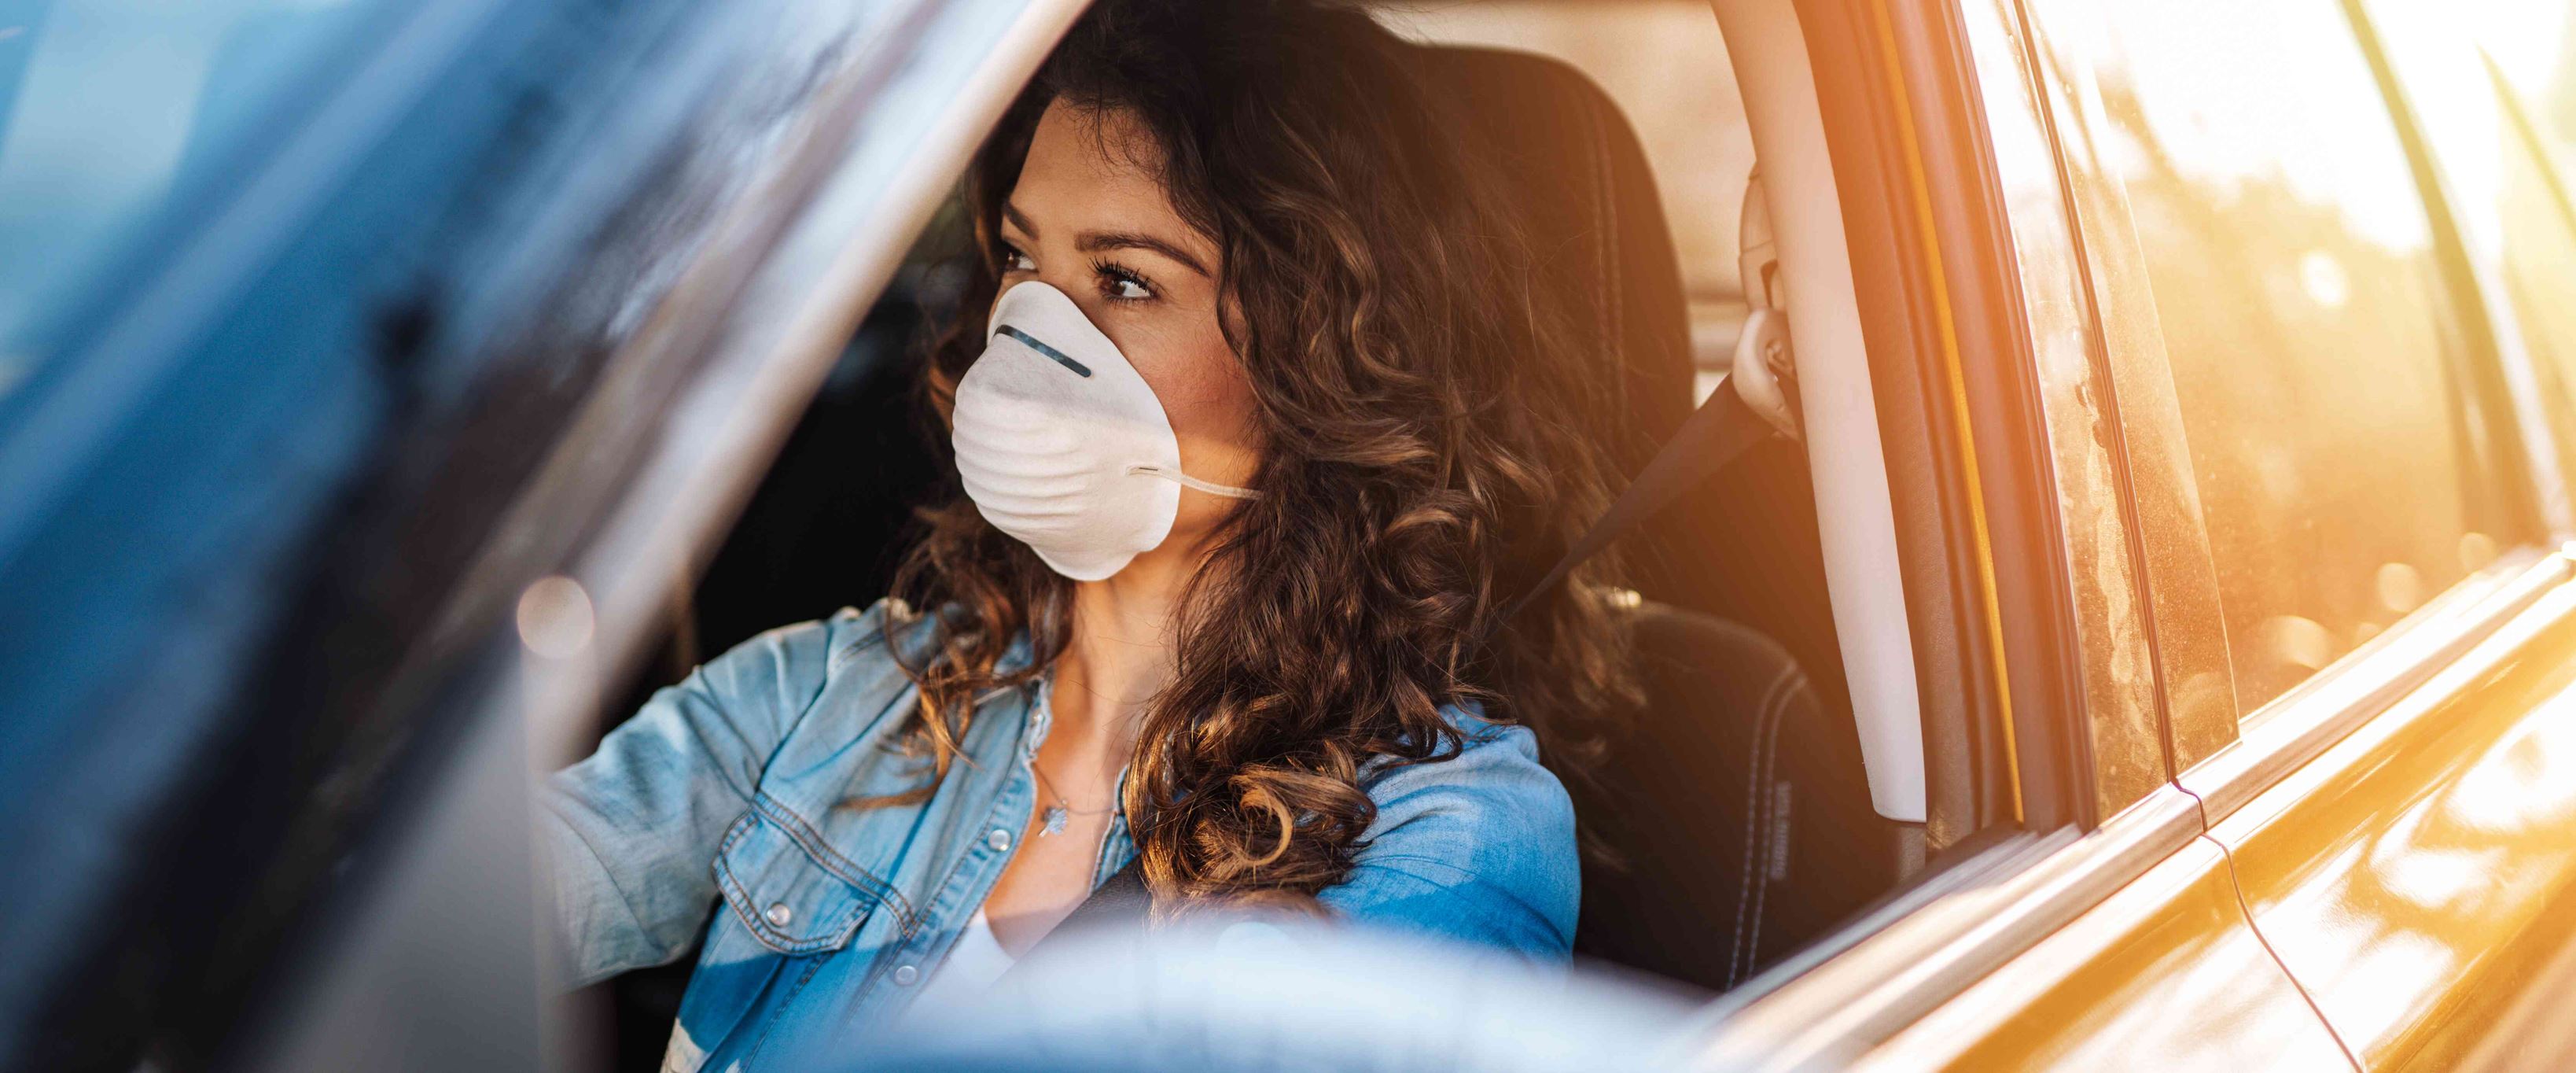 Woman wearing face mask driving